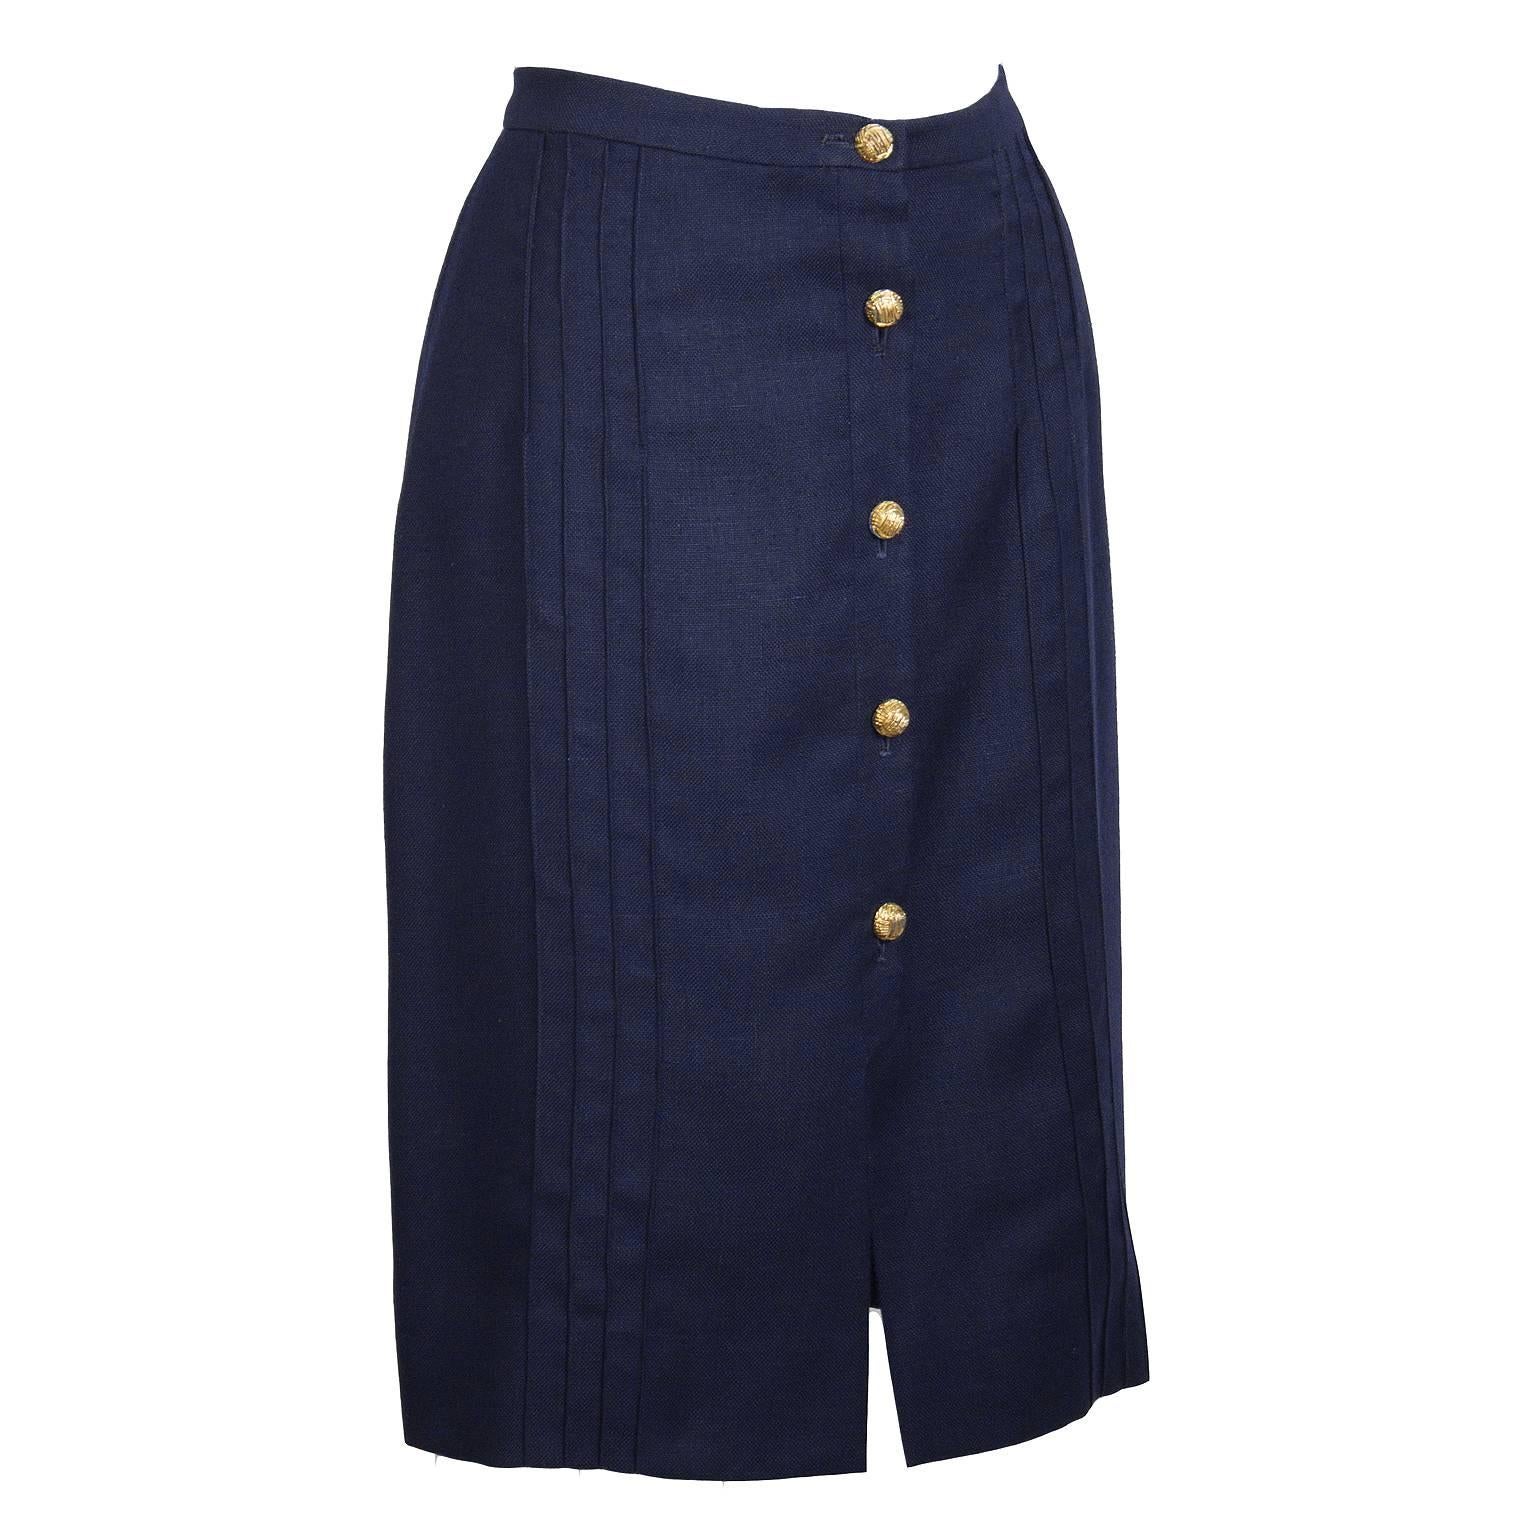 Simple and sophisticated Valentino blue linen skirt from the 1970's. Straight cut, with a front button closure and a front slit. Buttons are gold with a woven motif. Interesting vertical seaming detail on front and back. Excellent vintage condition.